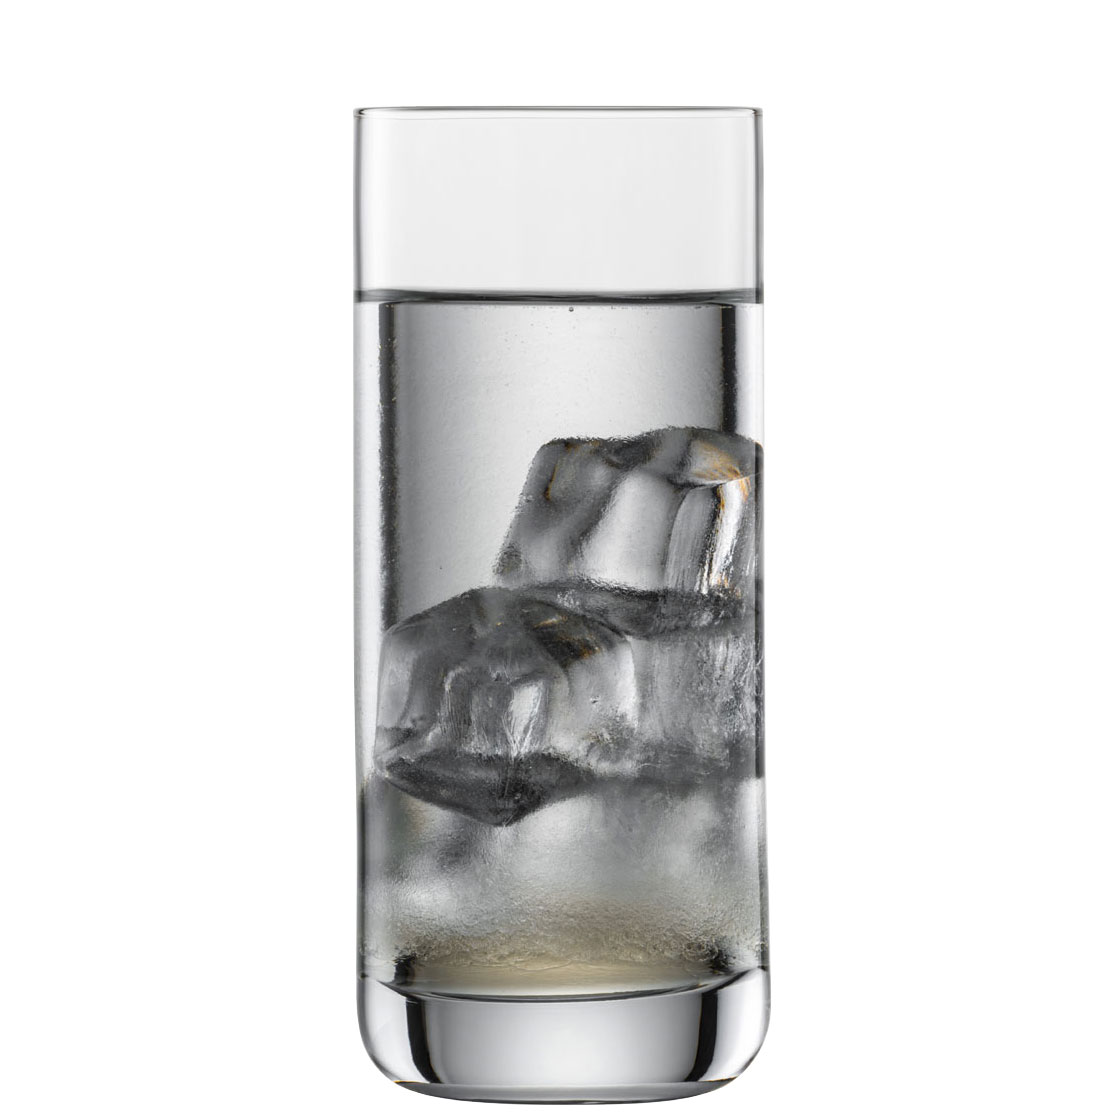 View more long drink & tumblers from our Long drink & Tumblers range